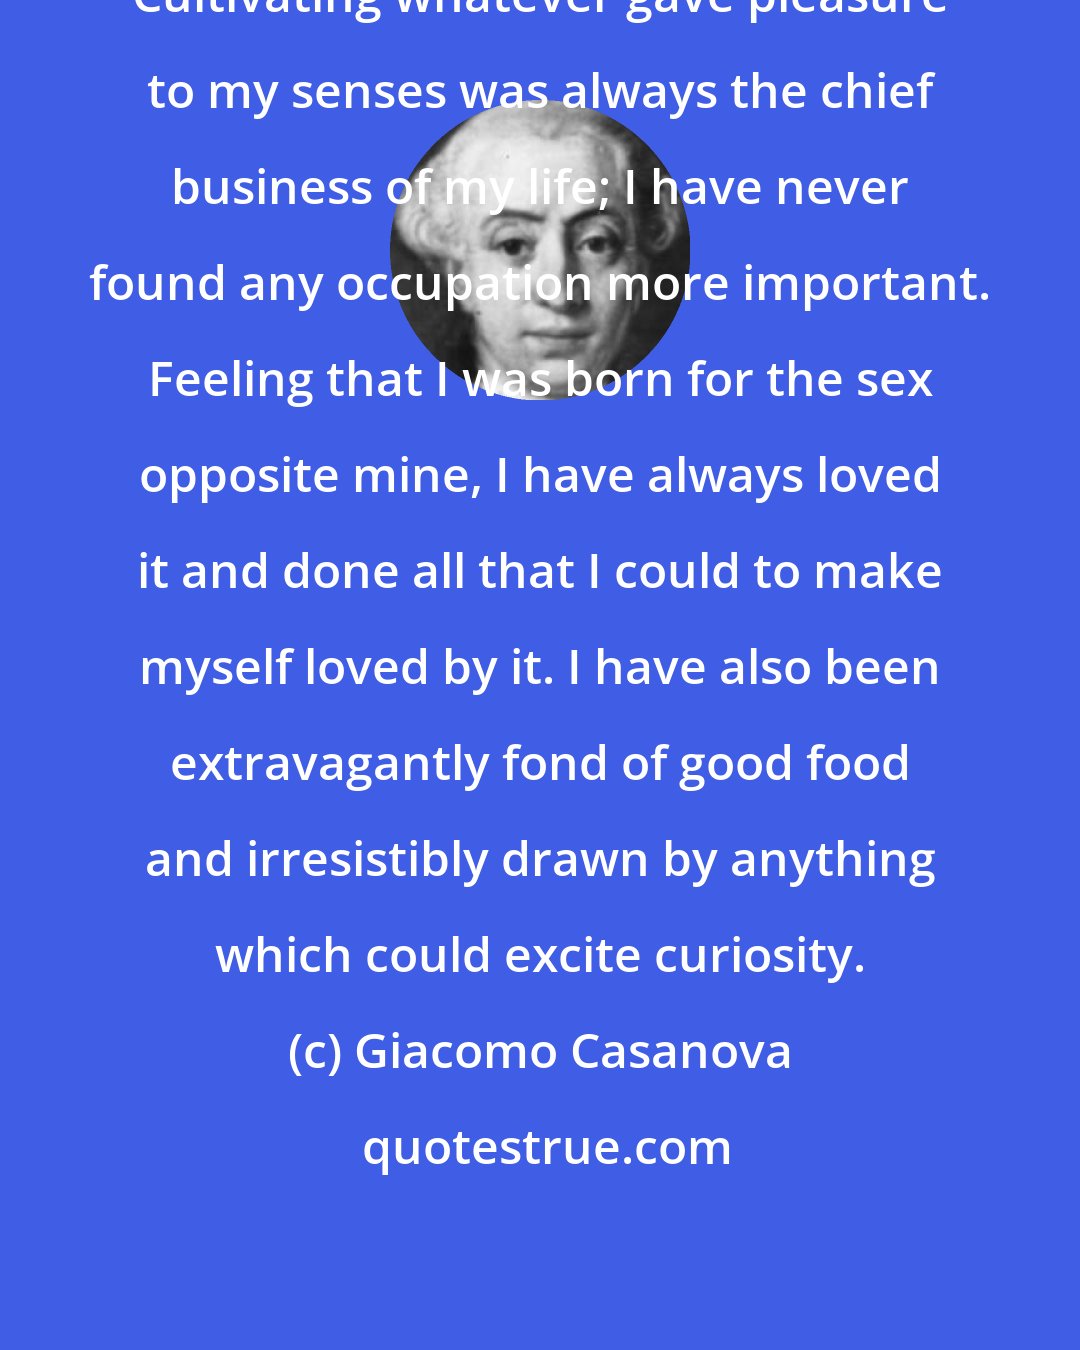 Giacomo Casanova: Cultivating whatever gave pleasure to my senses was always the chief business of my life; I have never found any occupation more important. Feeling that I was born for the sex opposite mine, I have always loved it and done all that I could to make myself loved by it. I have also been extravagantly fond of good food and irresistibly drawn by anything which could excite curiosity.